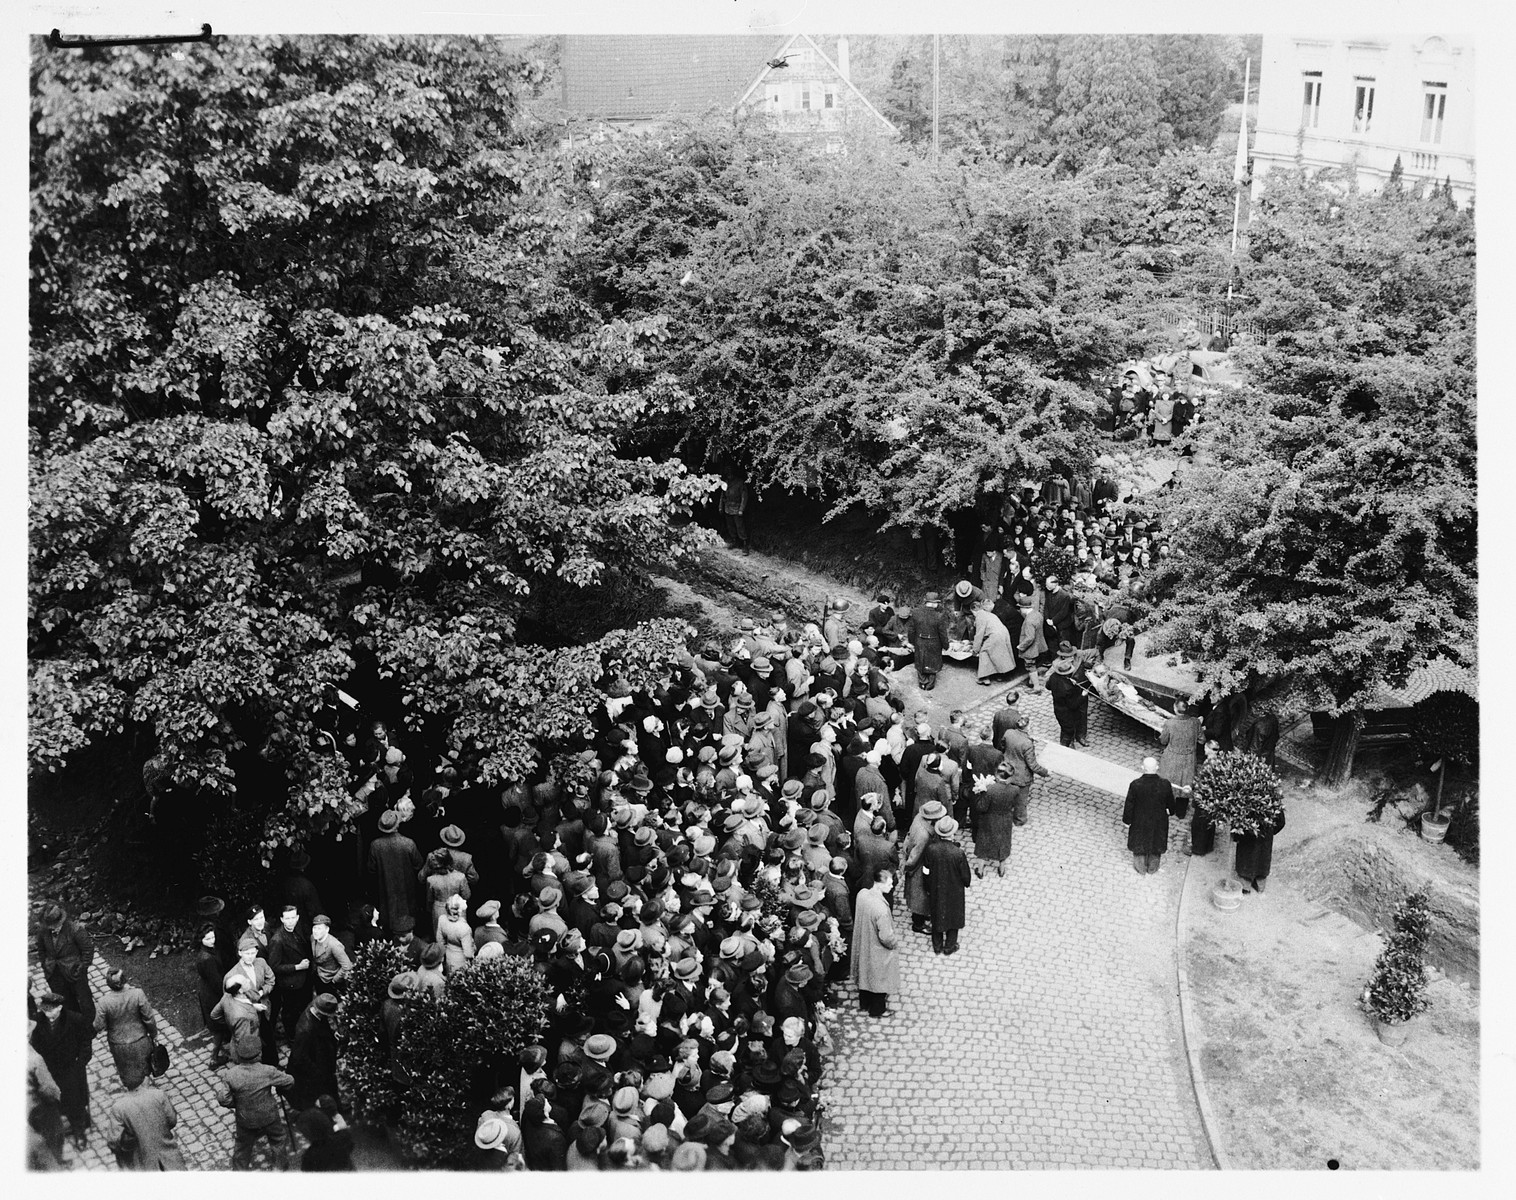 Under the direction of American soldiers, German civilians bury the bodies of 71 political prisoners, exhumed from a mass grave near Solingen-Ohligs, in new graves in front of the city hall.  

The victims, most of whom were taken from Luettringhausen prison, were shot and buried by the Gestapo following orders to eliminate all Reich enemies just before the end of the war.